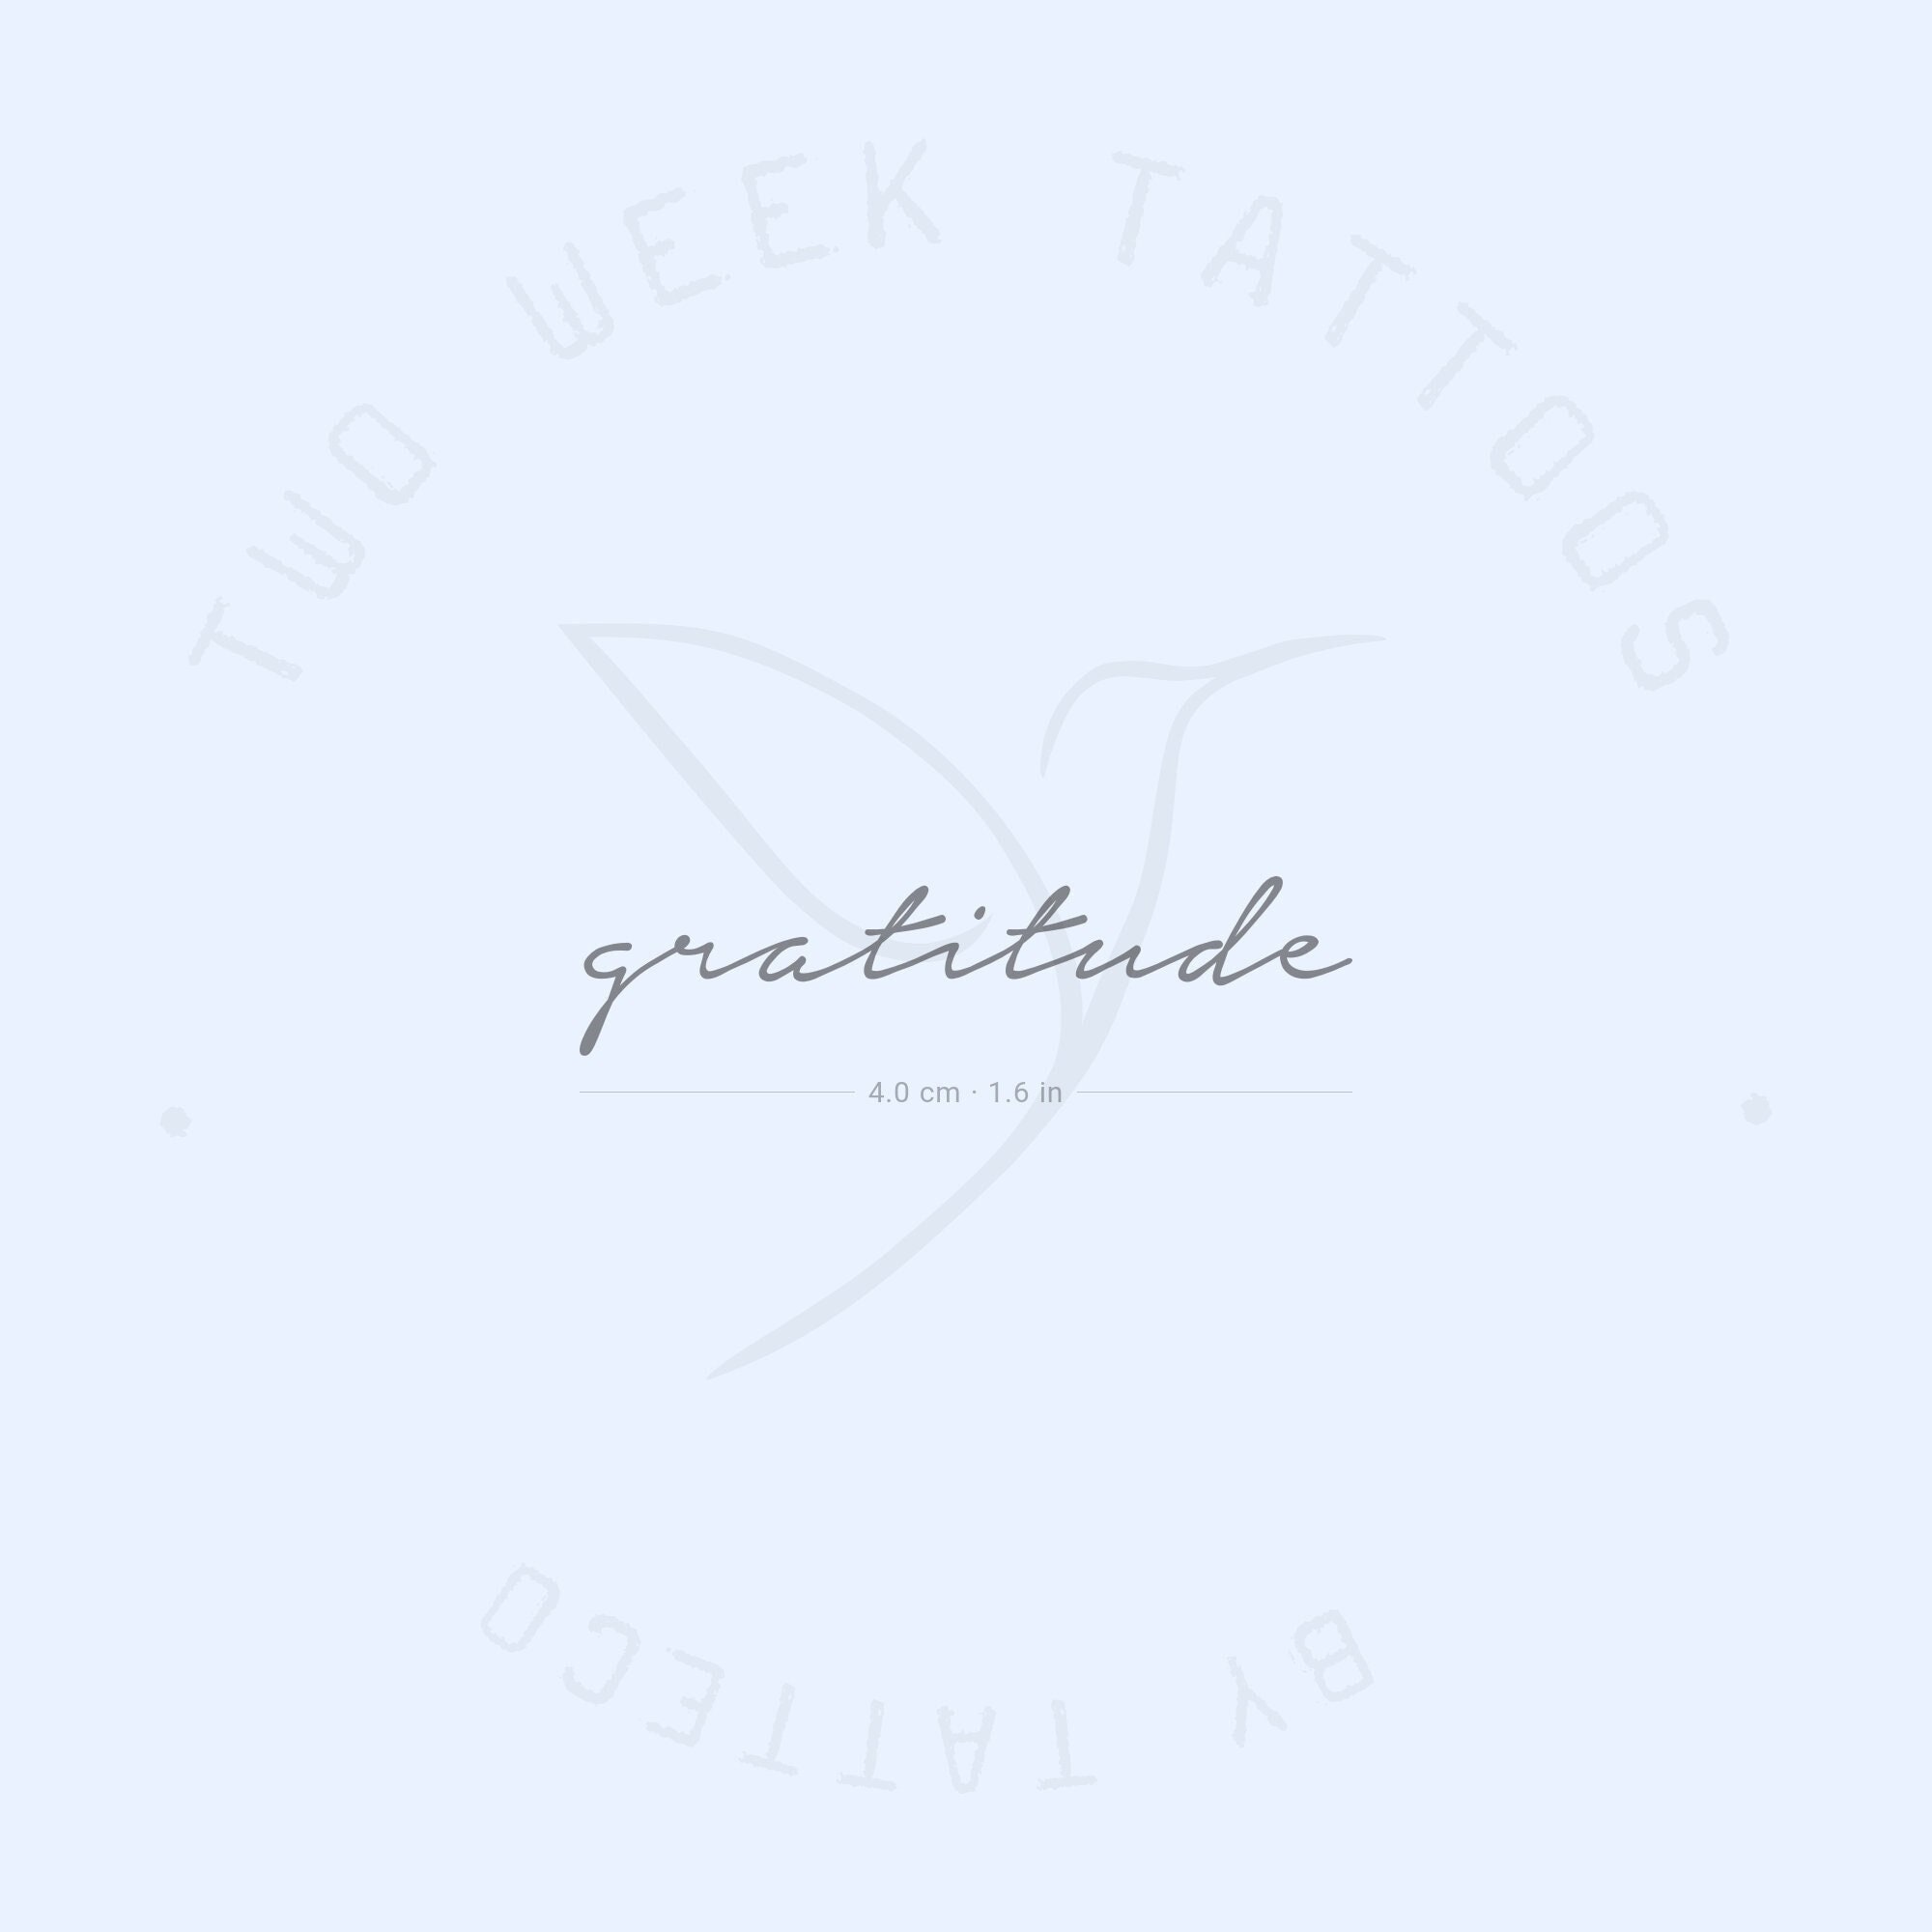 Fan Tattoo and Gratitude Note by parablev on DeviantArt